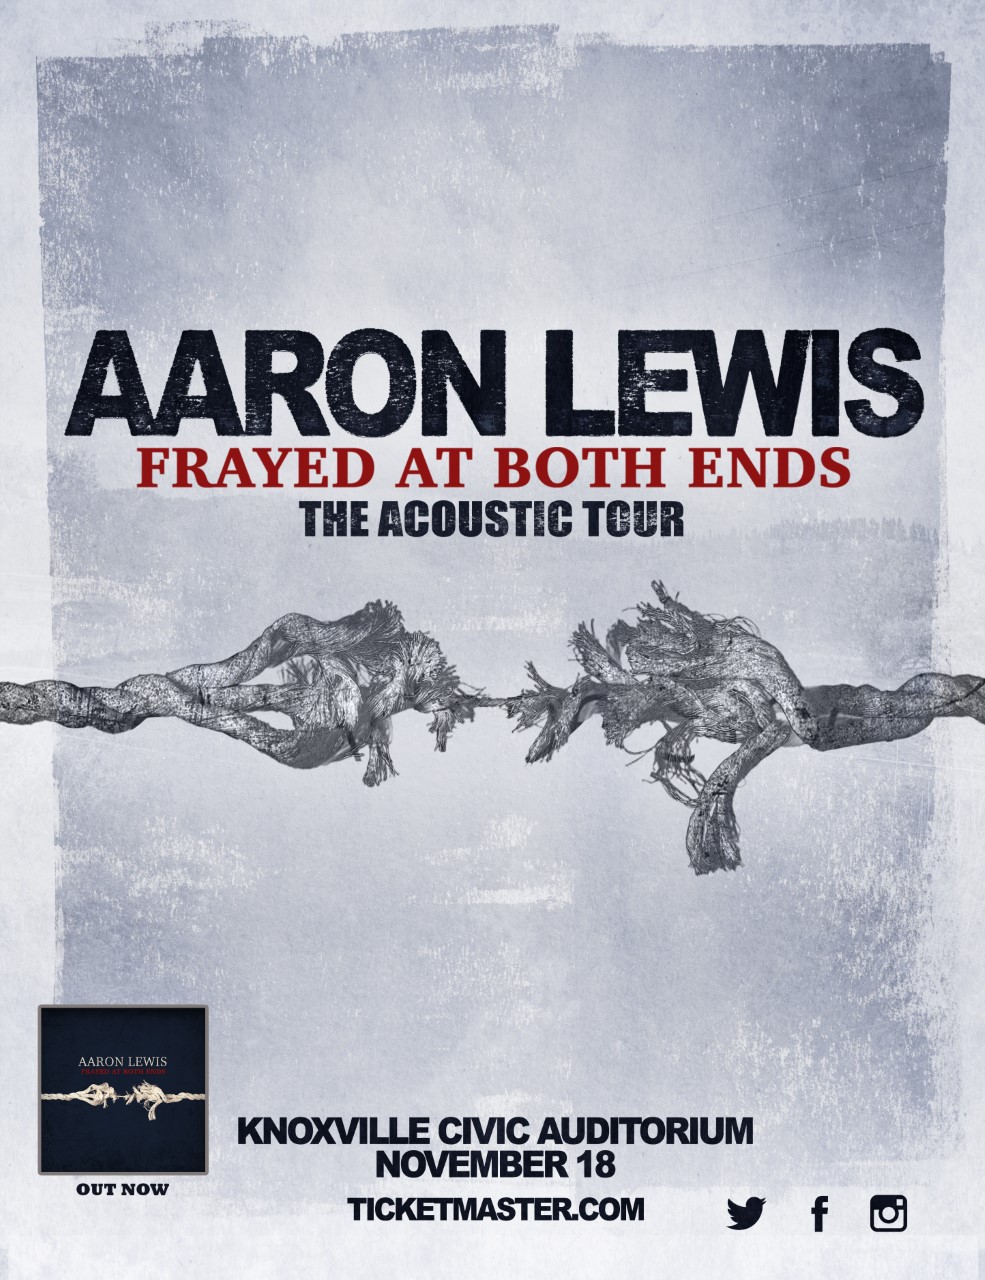 Enter to win tickets to Aaron Lewis Frayed at Both Ends Tour!